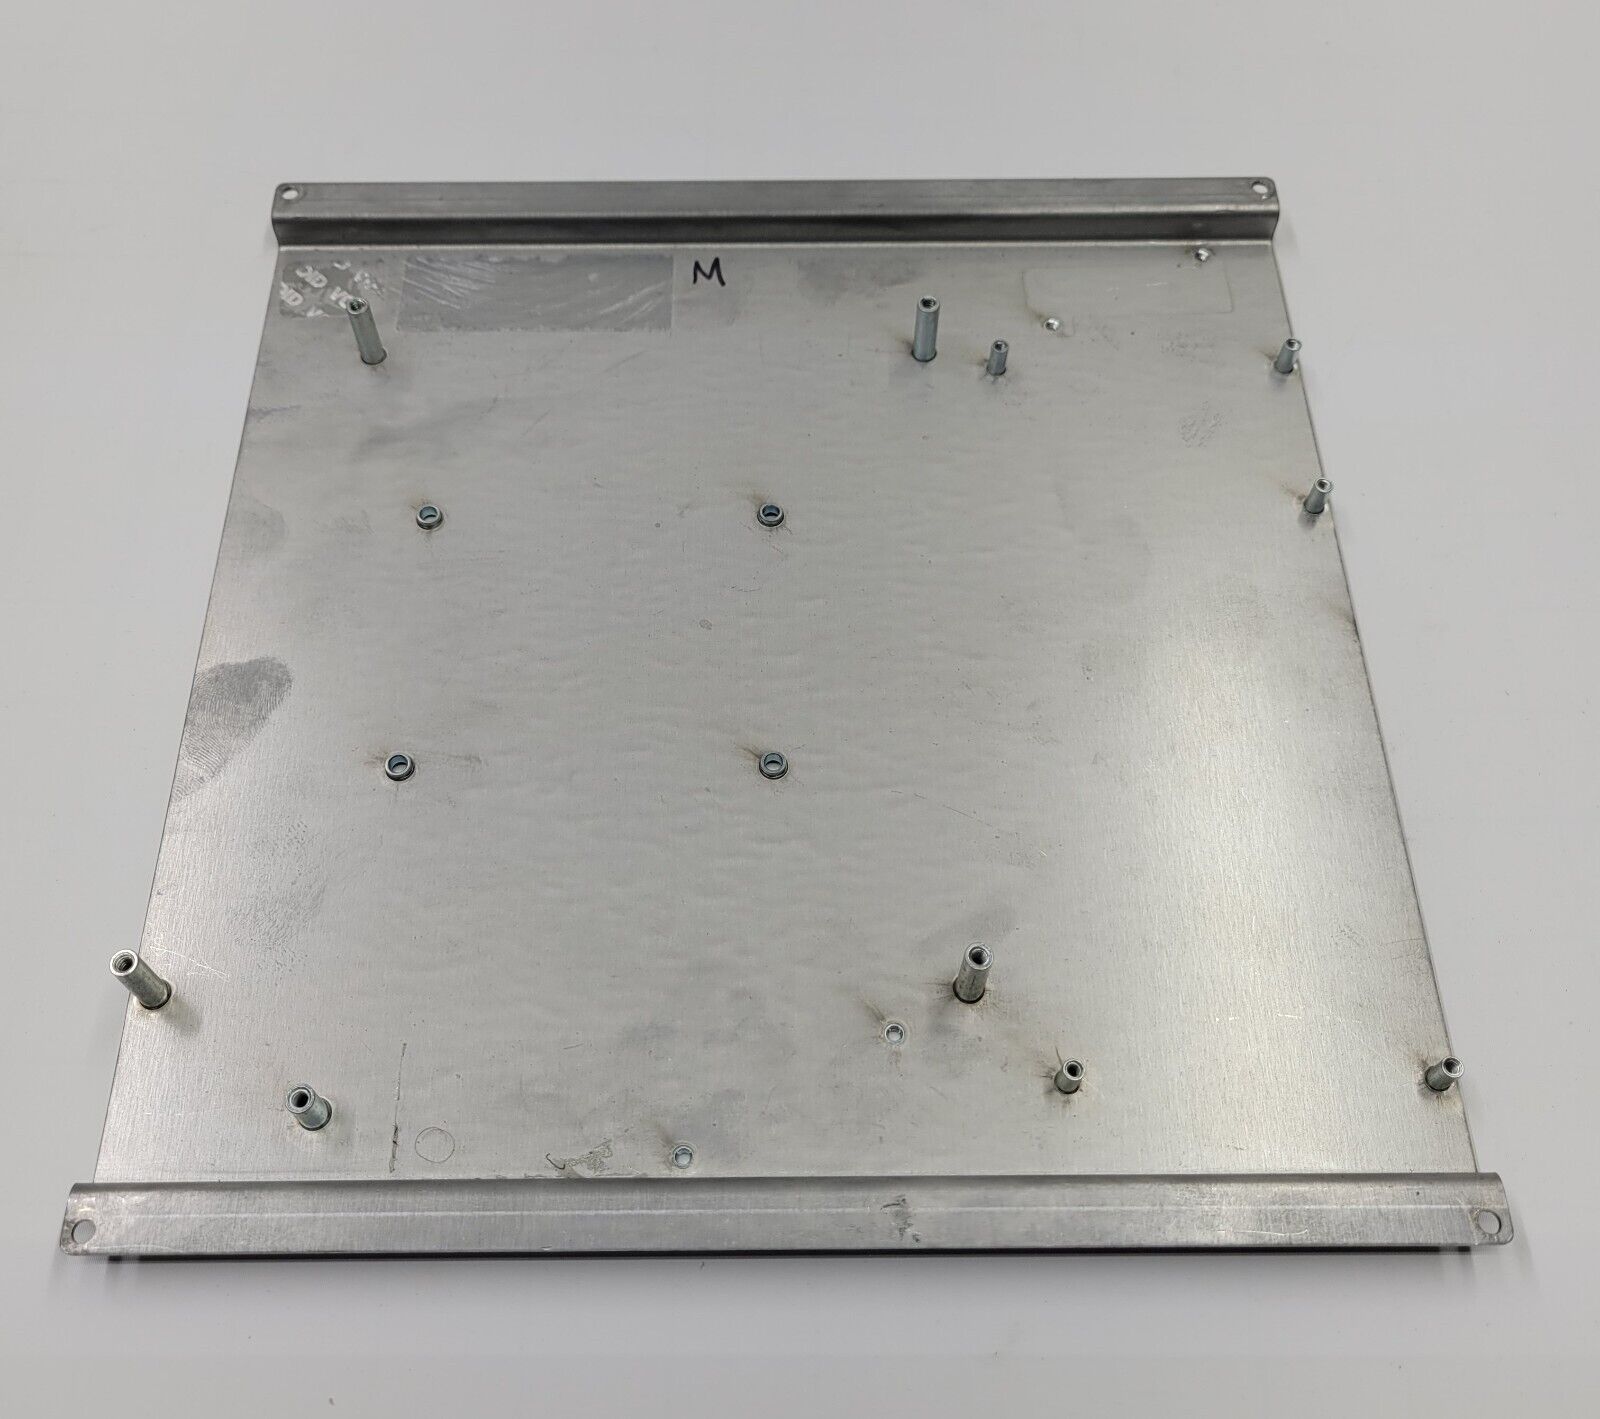 Metal Mini iTX Mounting Plate with Auxiliary PCB PEM Standoffs